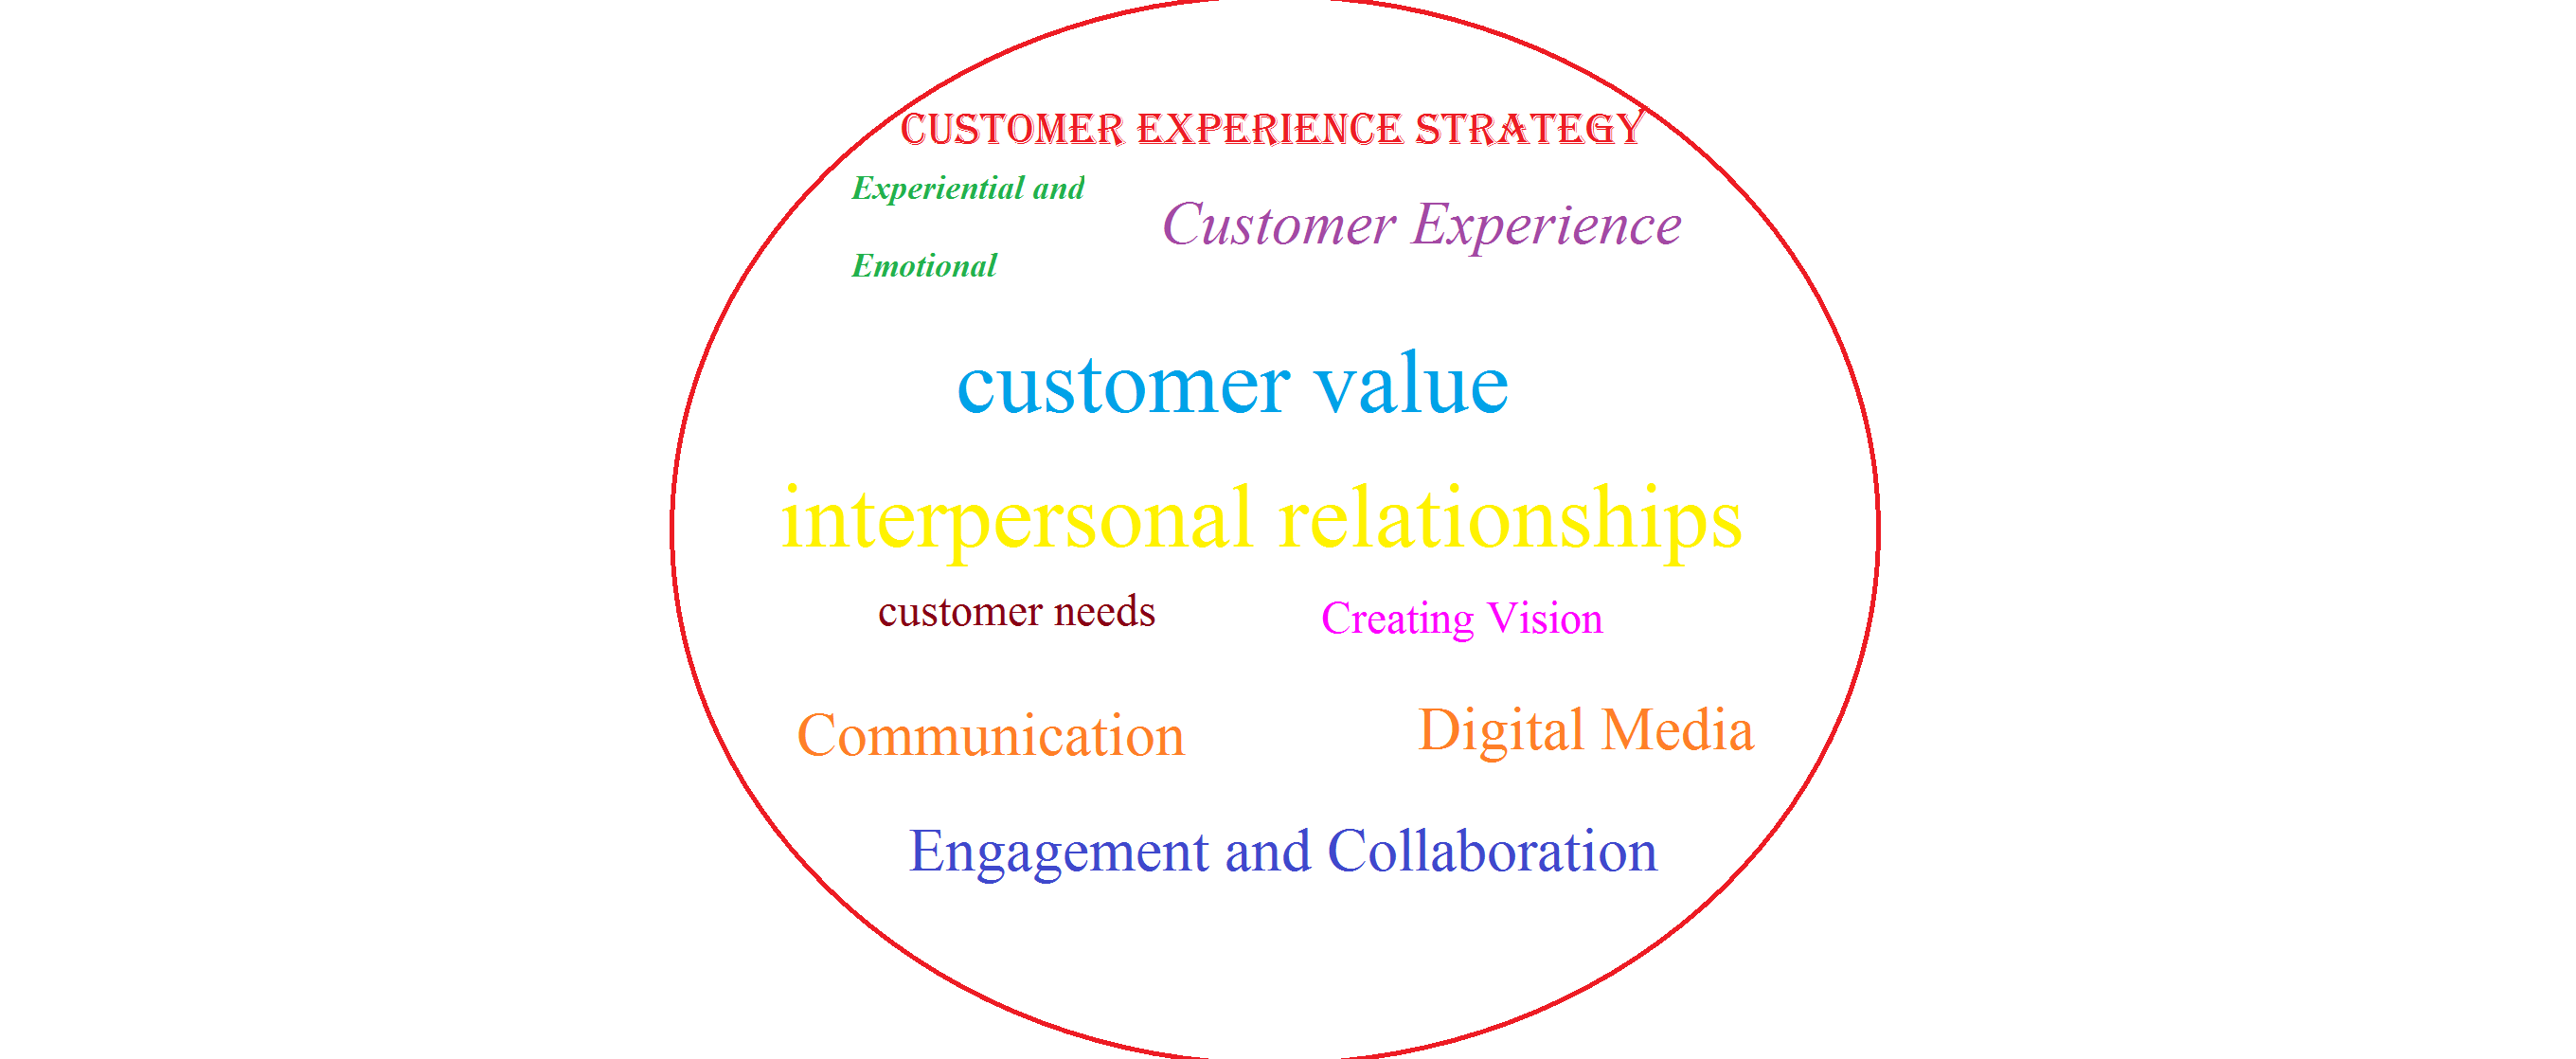 Customer experience strategy in marketing